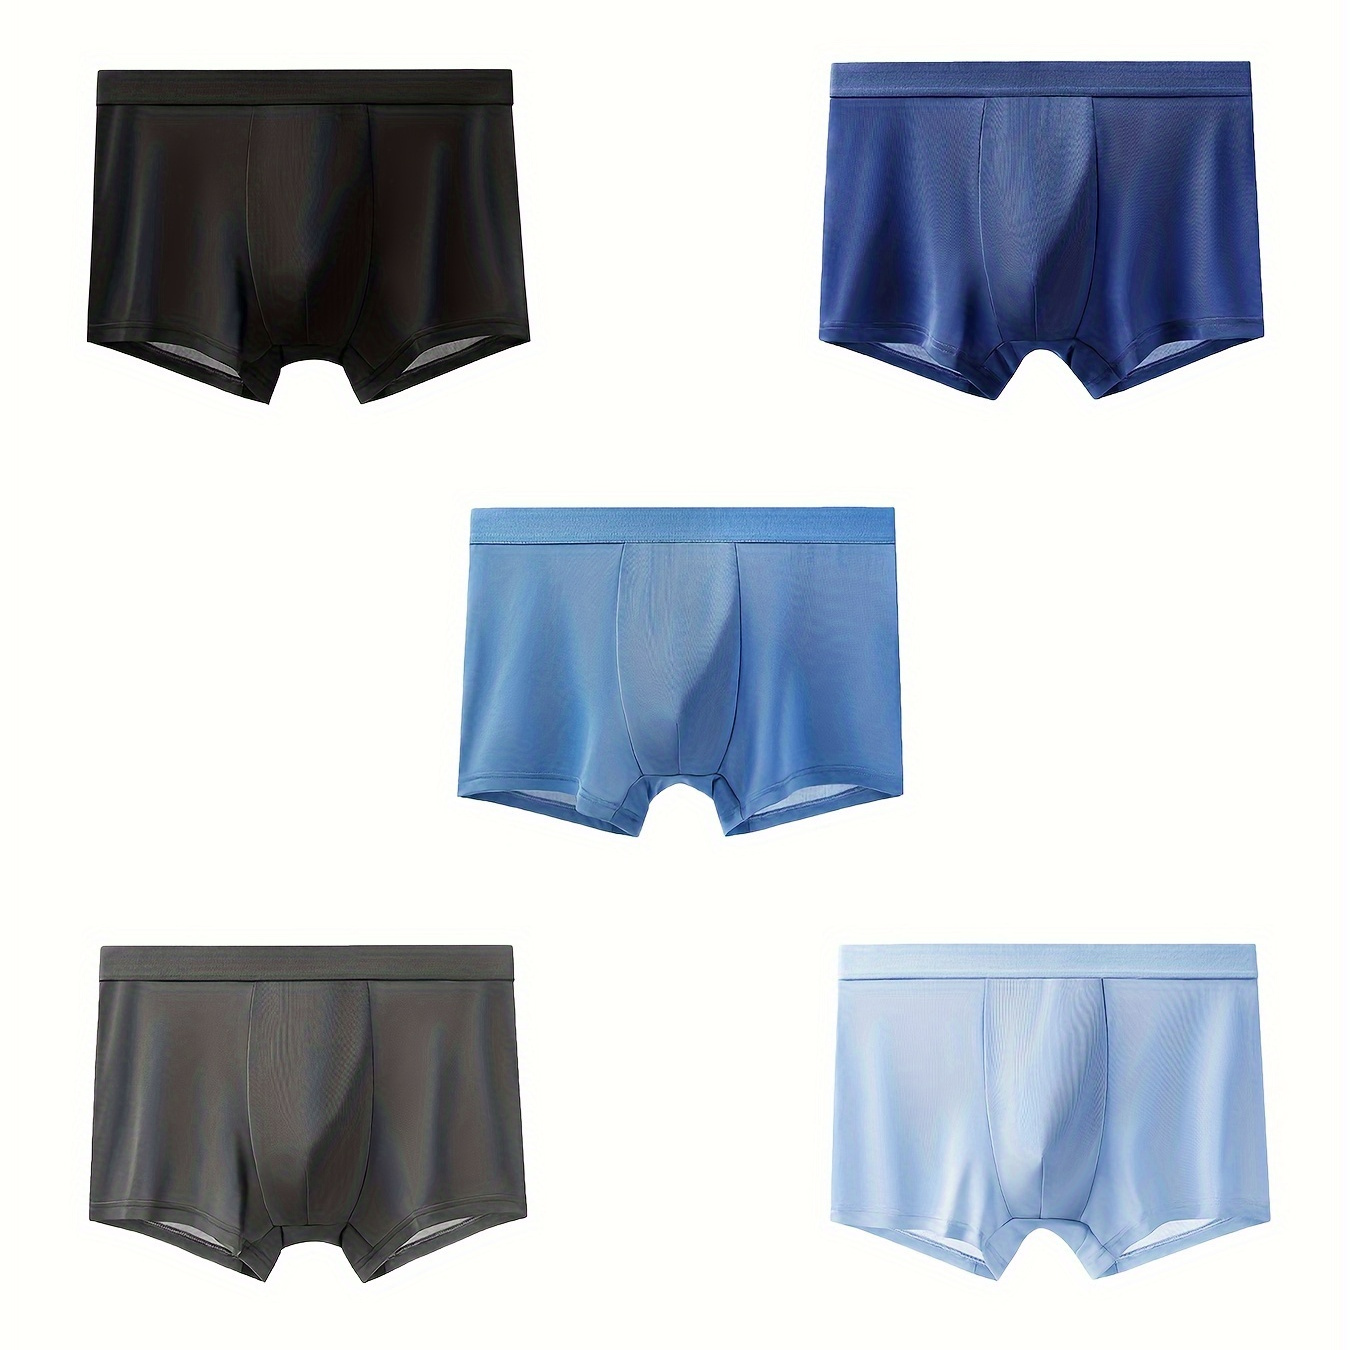 

5pcs Men's Ice Silk Solid Color Underwear, Casual Elastic Boxer Briefs Shorts, Breathable Comfy Stretchy Boxer Trunks, Sports Shorts